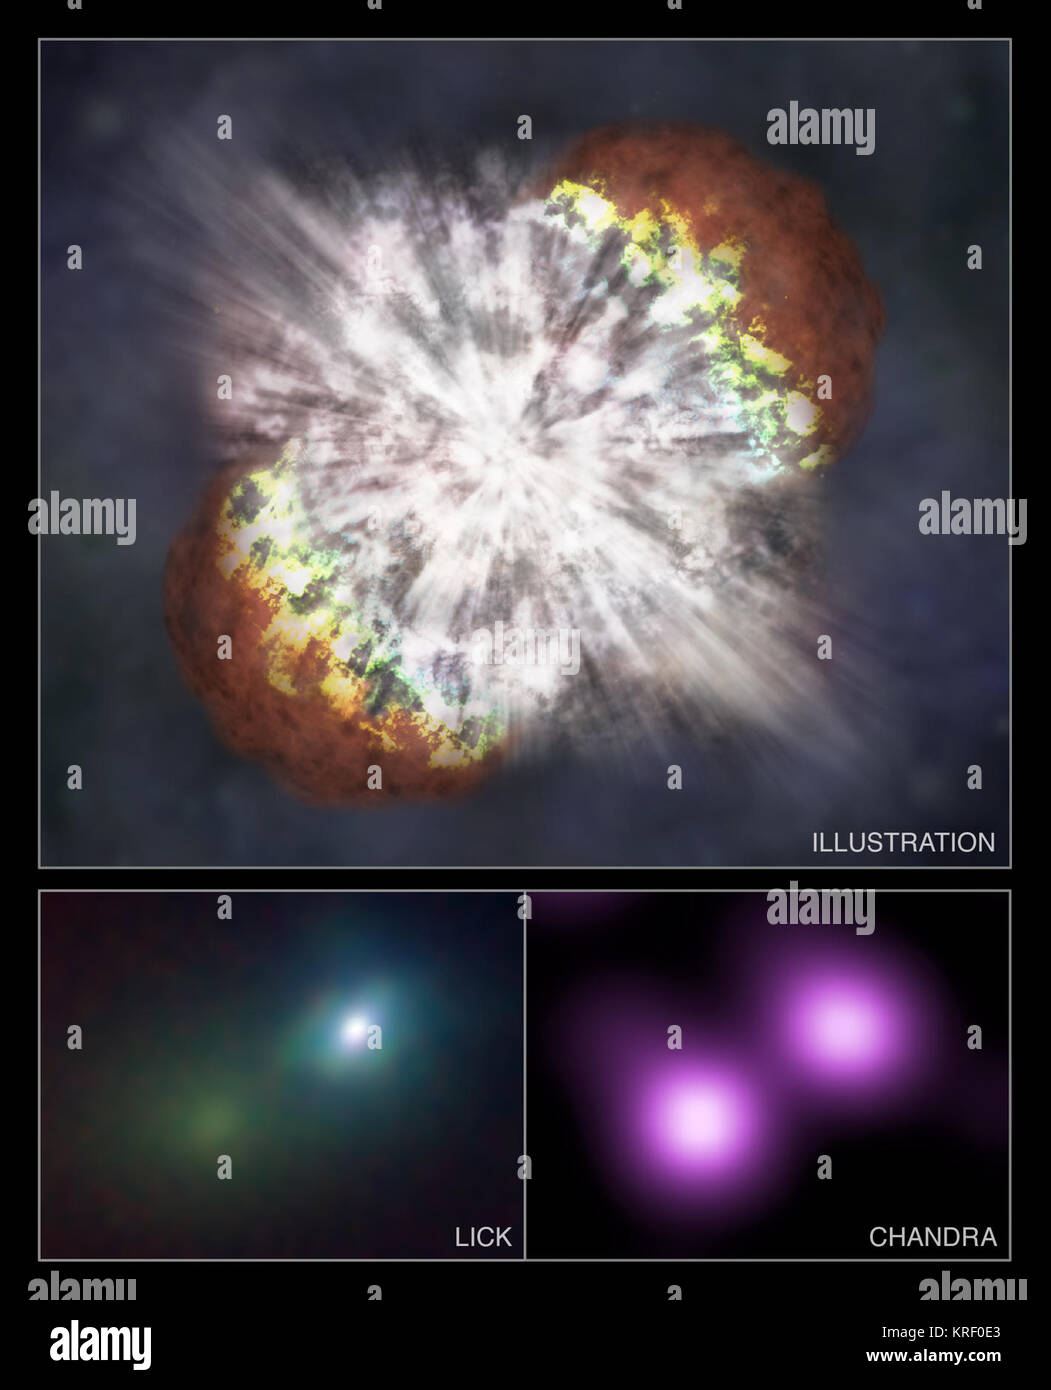 SN 2006gy is the brightest stellar explosion ever recorded and may be a long-sought new type of supernova, according to observations by NASA's Chandra X-ray Observatory (bottom right panel) and ground-based optical telescopes (bottom left). This discovery indicates that violent explosions of extremely massive stars, depicted in the artist's illustration (top panel), were relatively common in the early universe. These data also suggest that a similar explosion may be ready to go off in our own Galaxy. Bright Supernova Sn2006gy Stock Photo